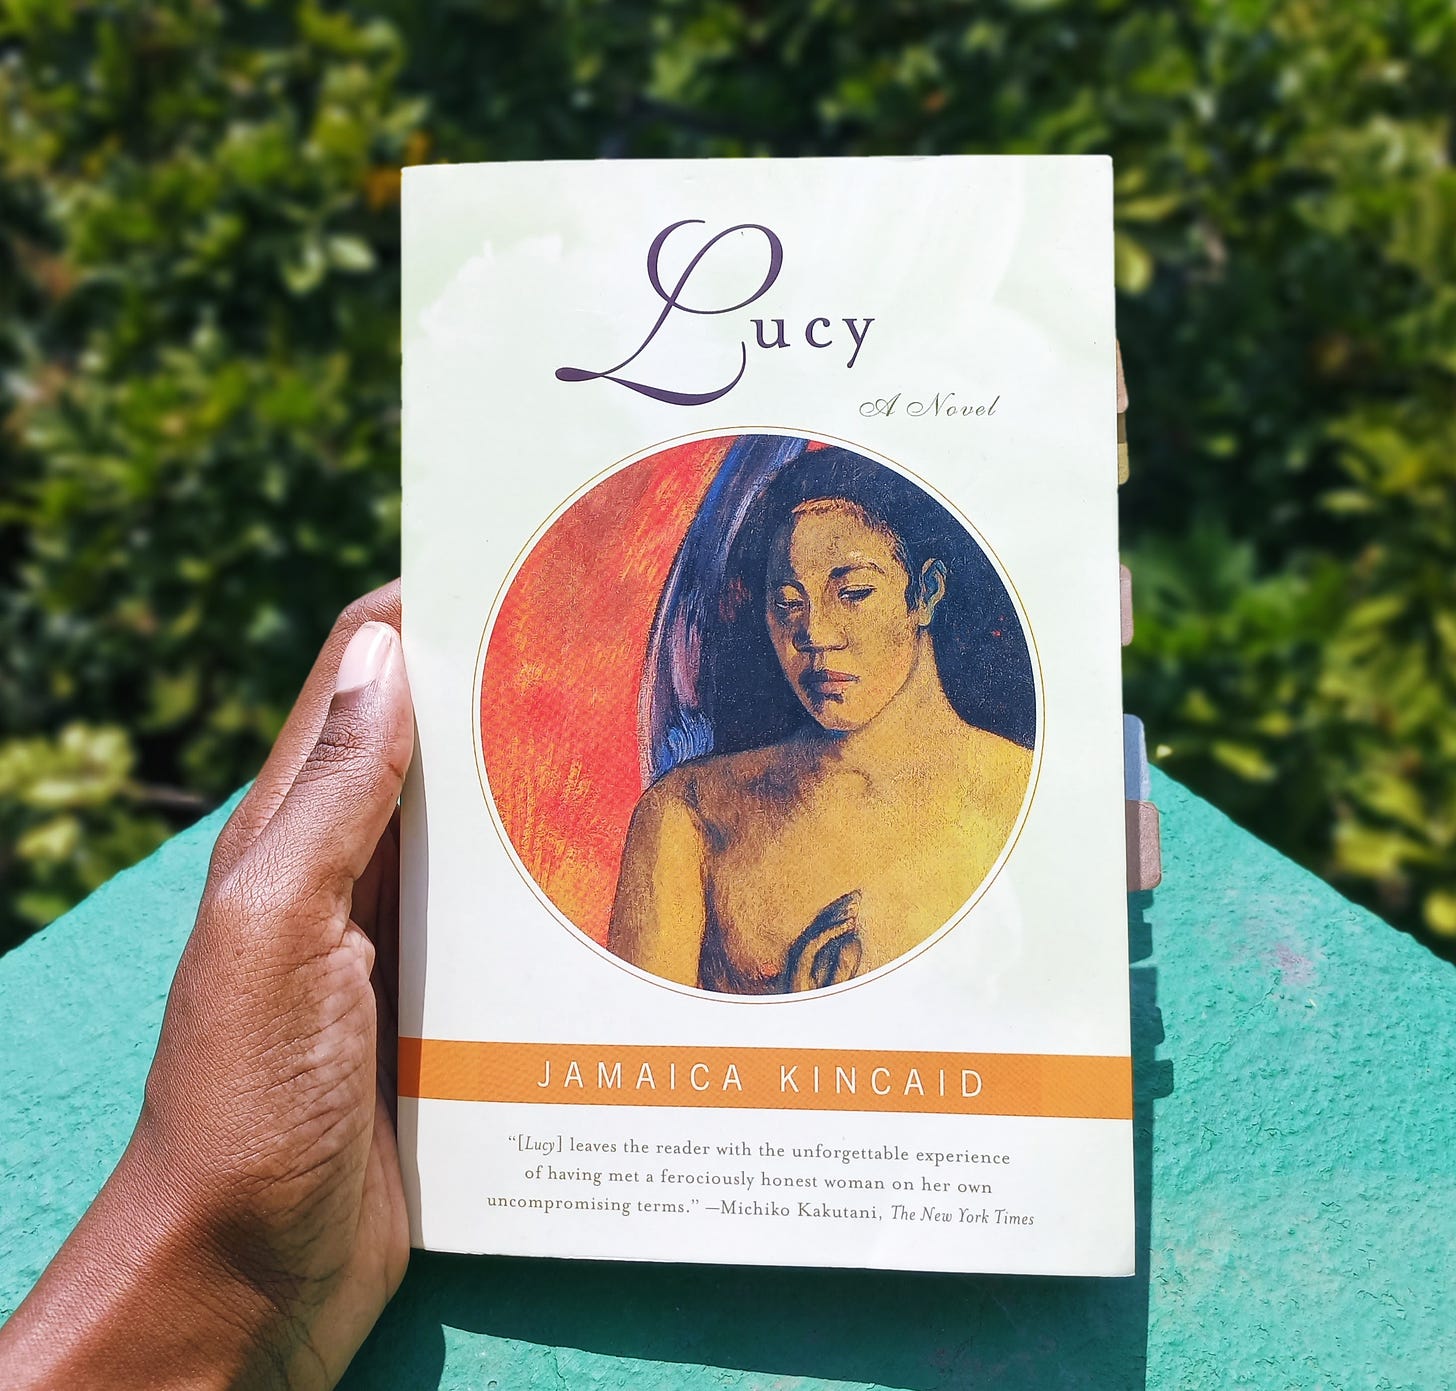 My black hand holds a paperback copy of Lucy on a sea green wall with trees below. Cover design is a pale green watercolour backgroud with a detail of Paul Gauguin's "Savage Poems": an oval frame, deep orange background, brown female figure with long black hair holding one hand in front of her chest, eyes downcast in a sidelong glance, a curve of her purple wings behind her.